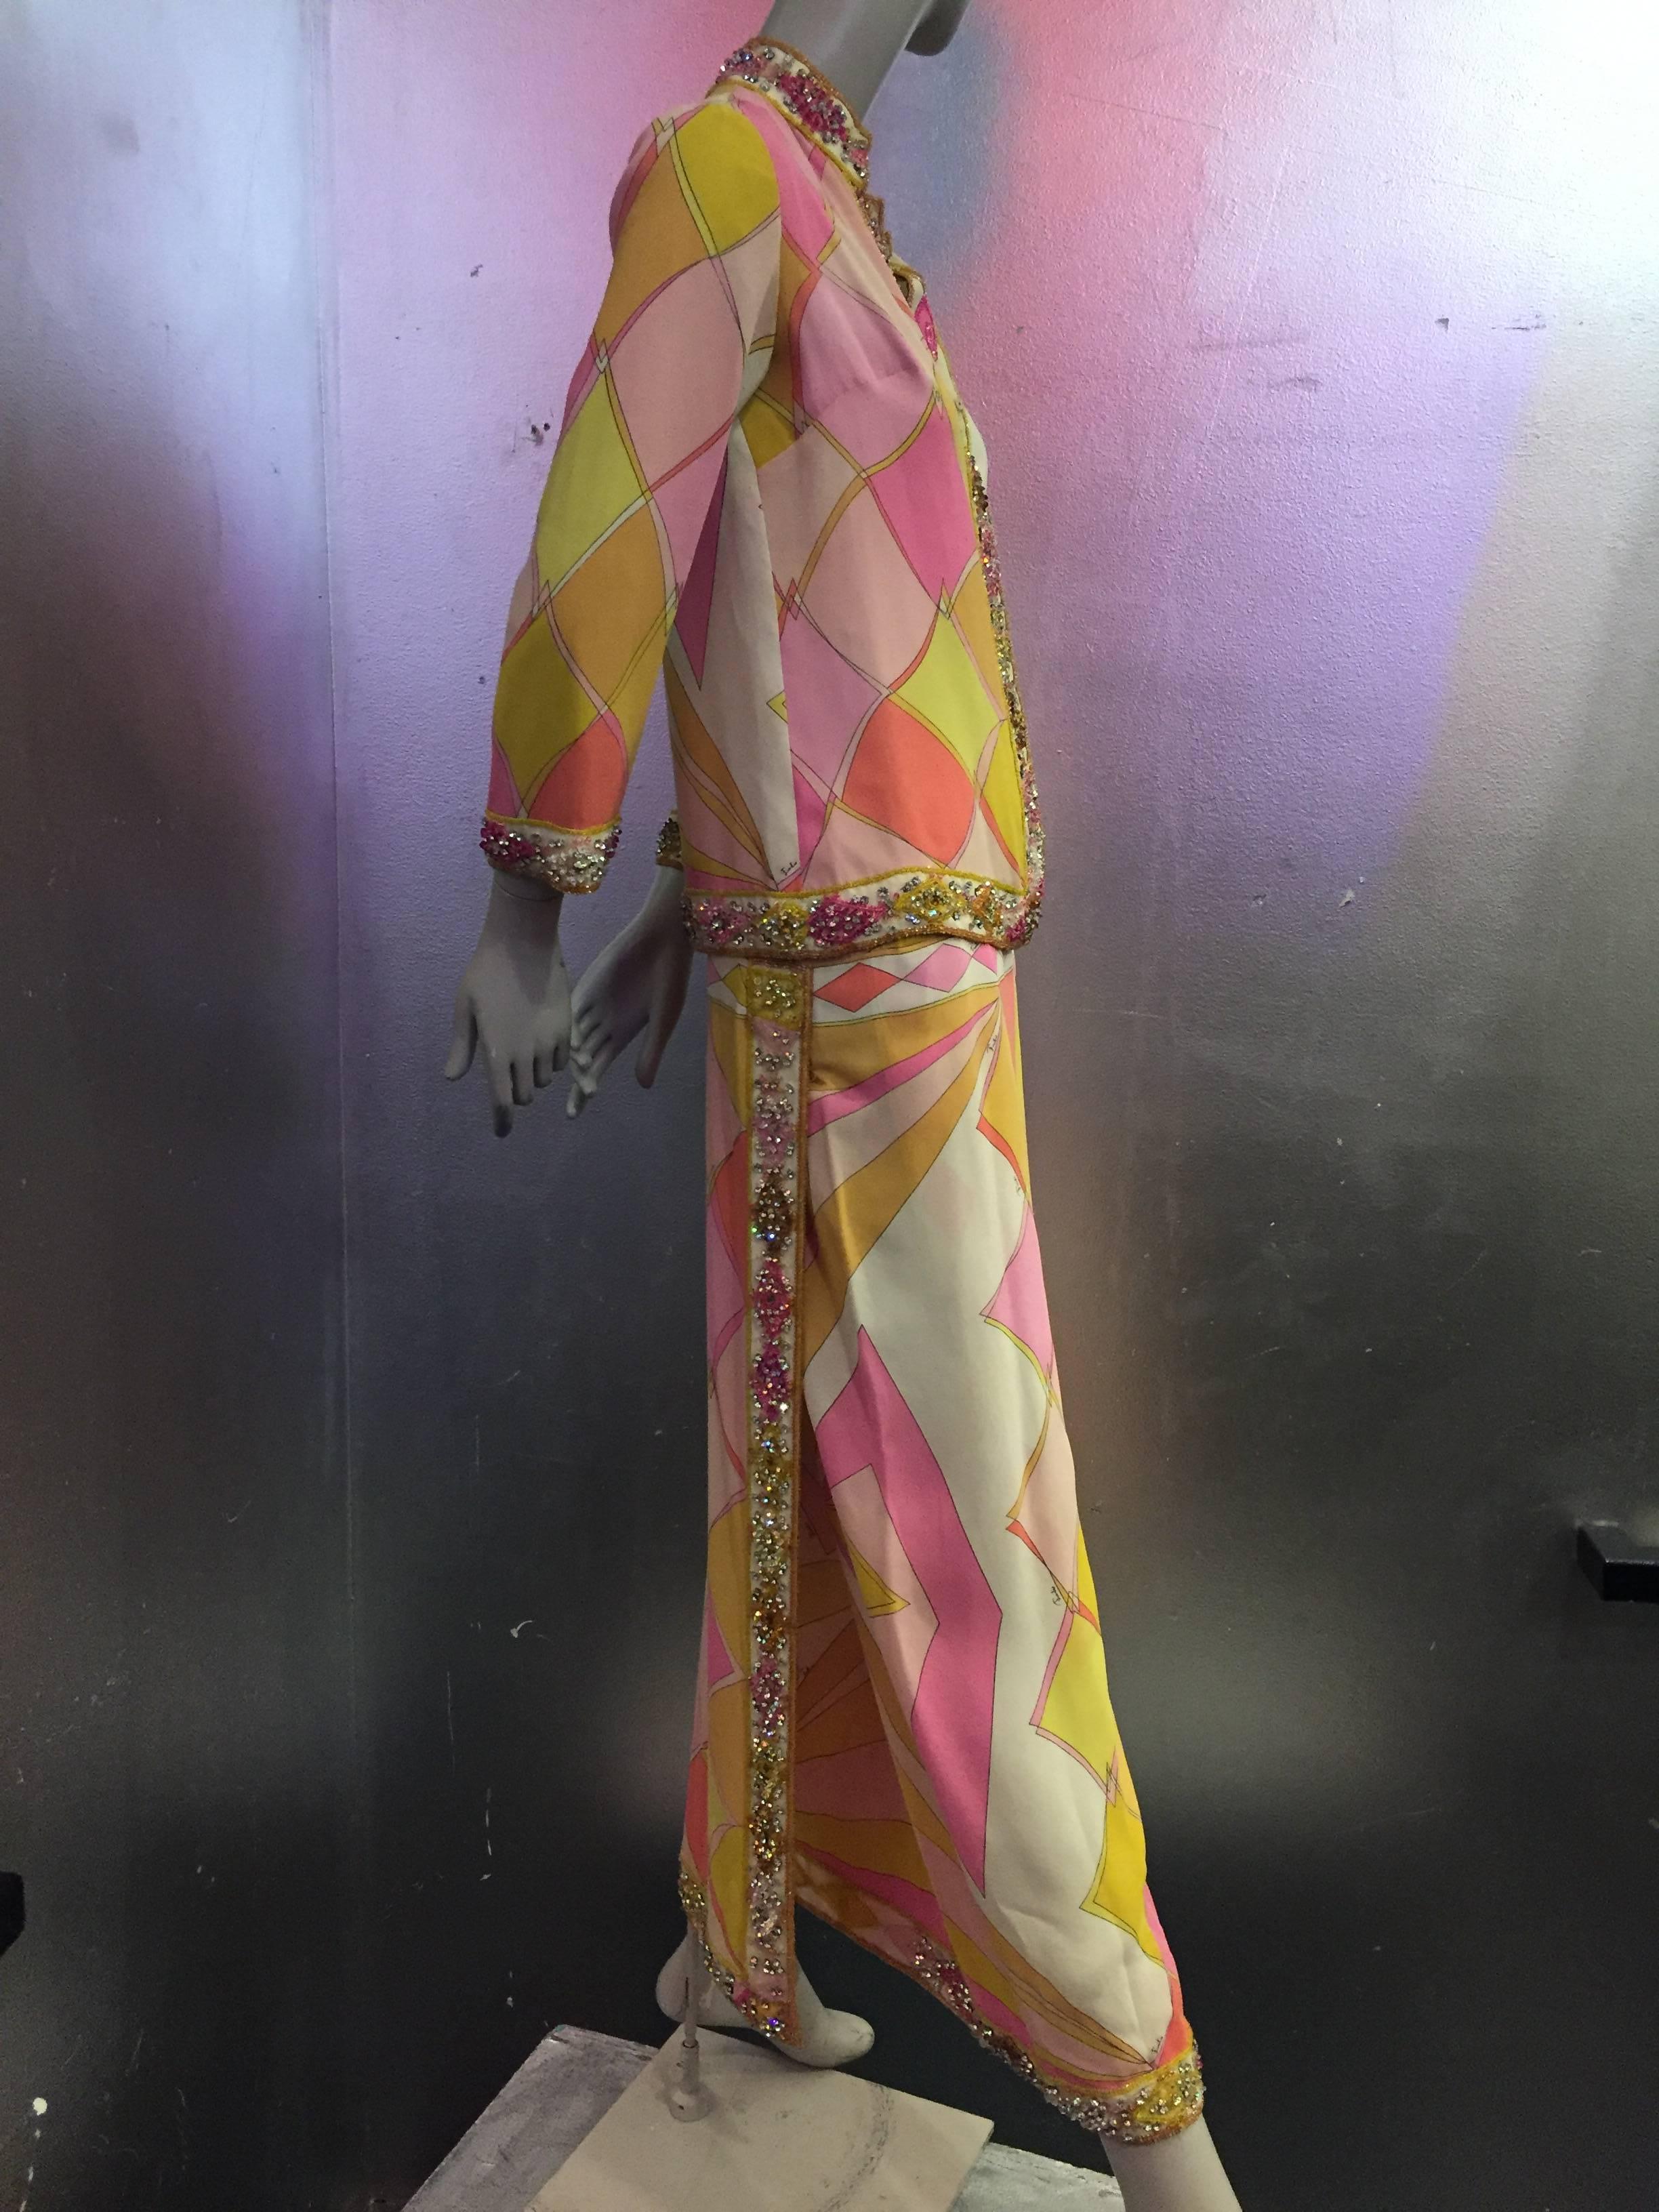 A gorgeous and rare 1960s Emilio Pucci coral, yellow, pink and white two-piece silk evening ensemble for resort or summer with maxi skirt and cardigan 3/4 sleeve style top.  Cardigan neckline, hem and cuffs, as well as skirt hem are trimmed in